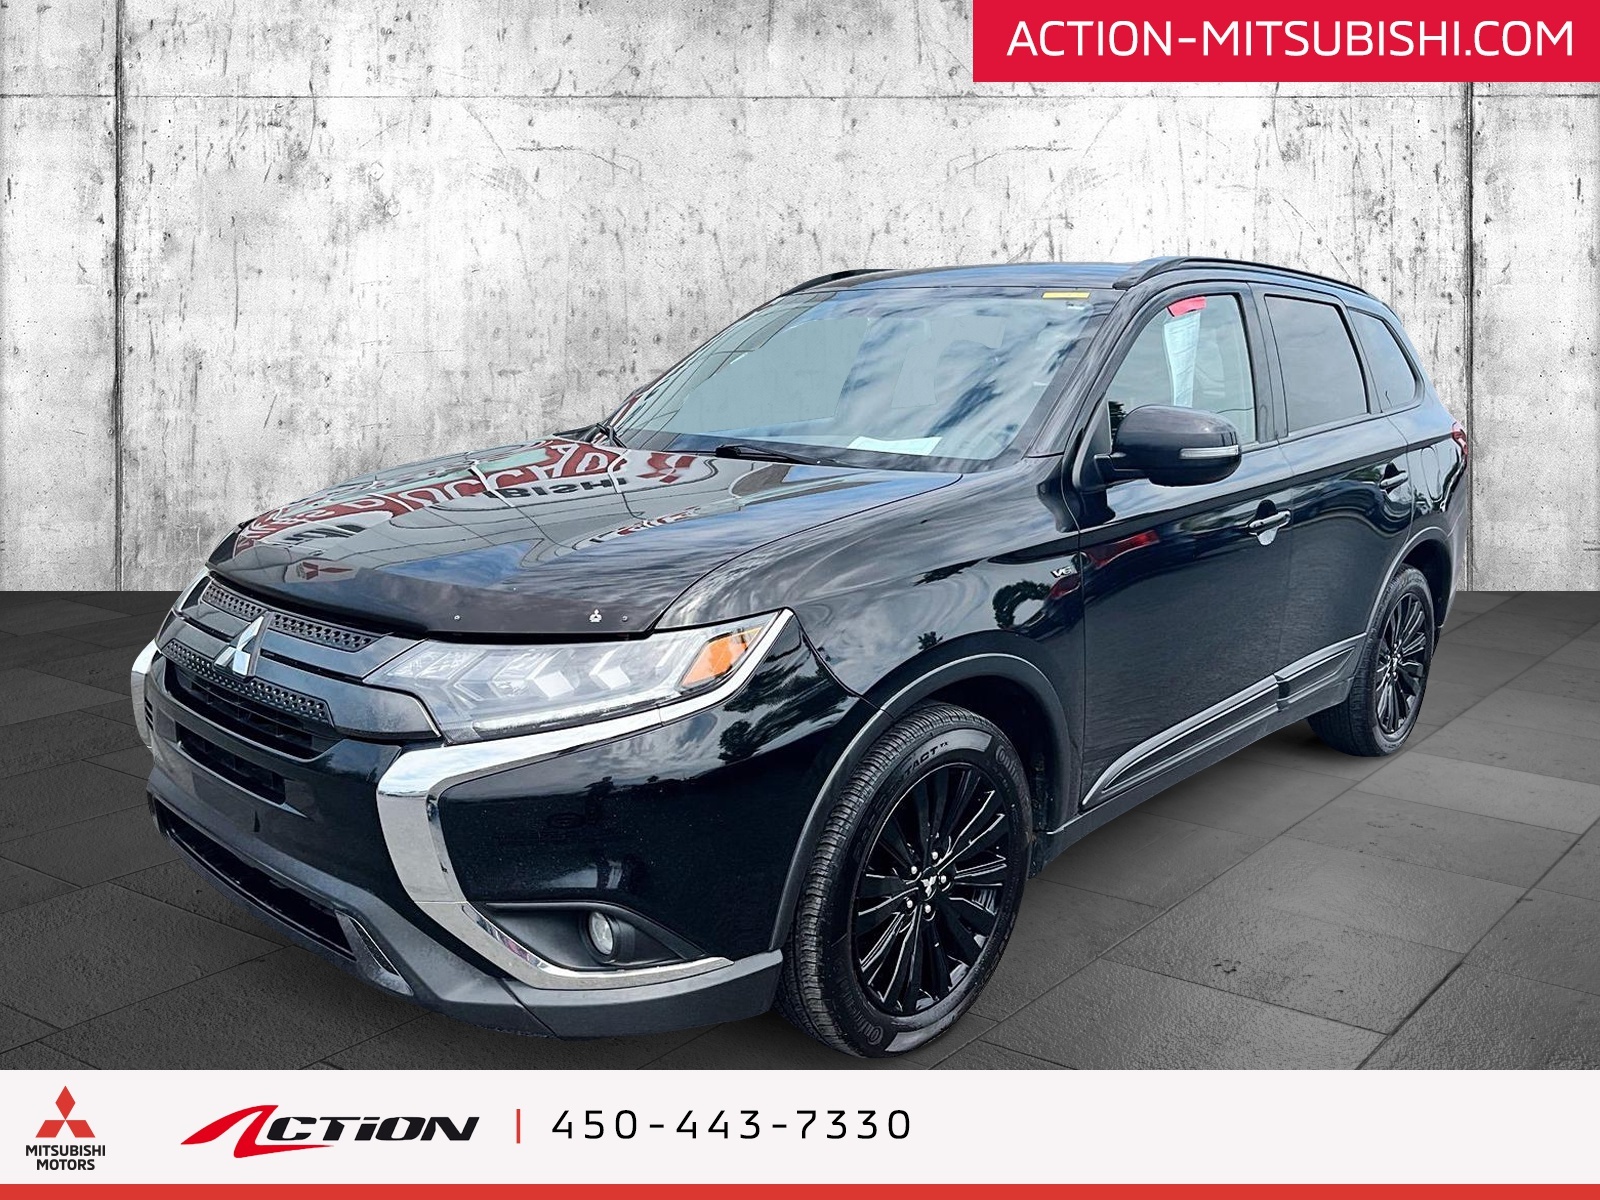 2020 Mitsubishi Outlander LIMITED EDITION S-AWC. TOIT OUVRANT PNEUS HIVER IN